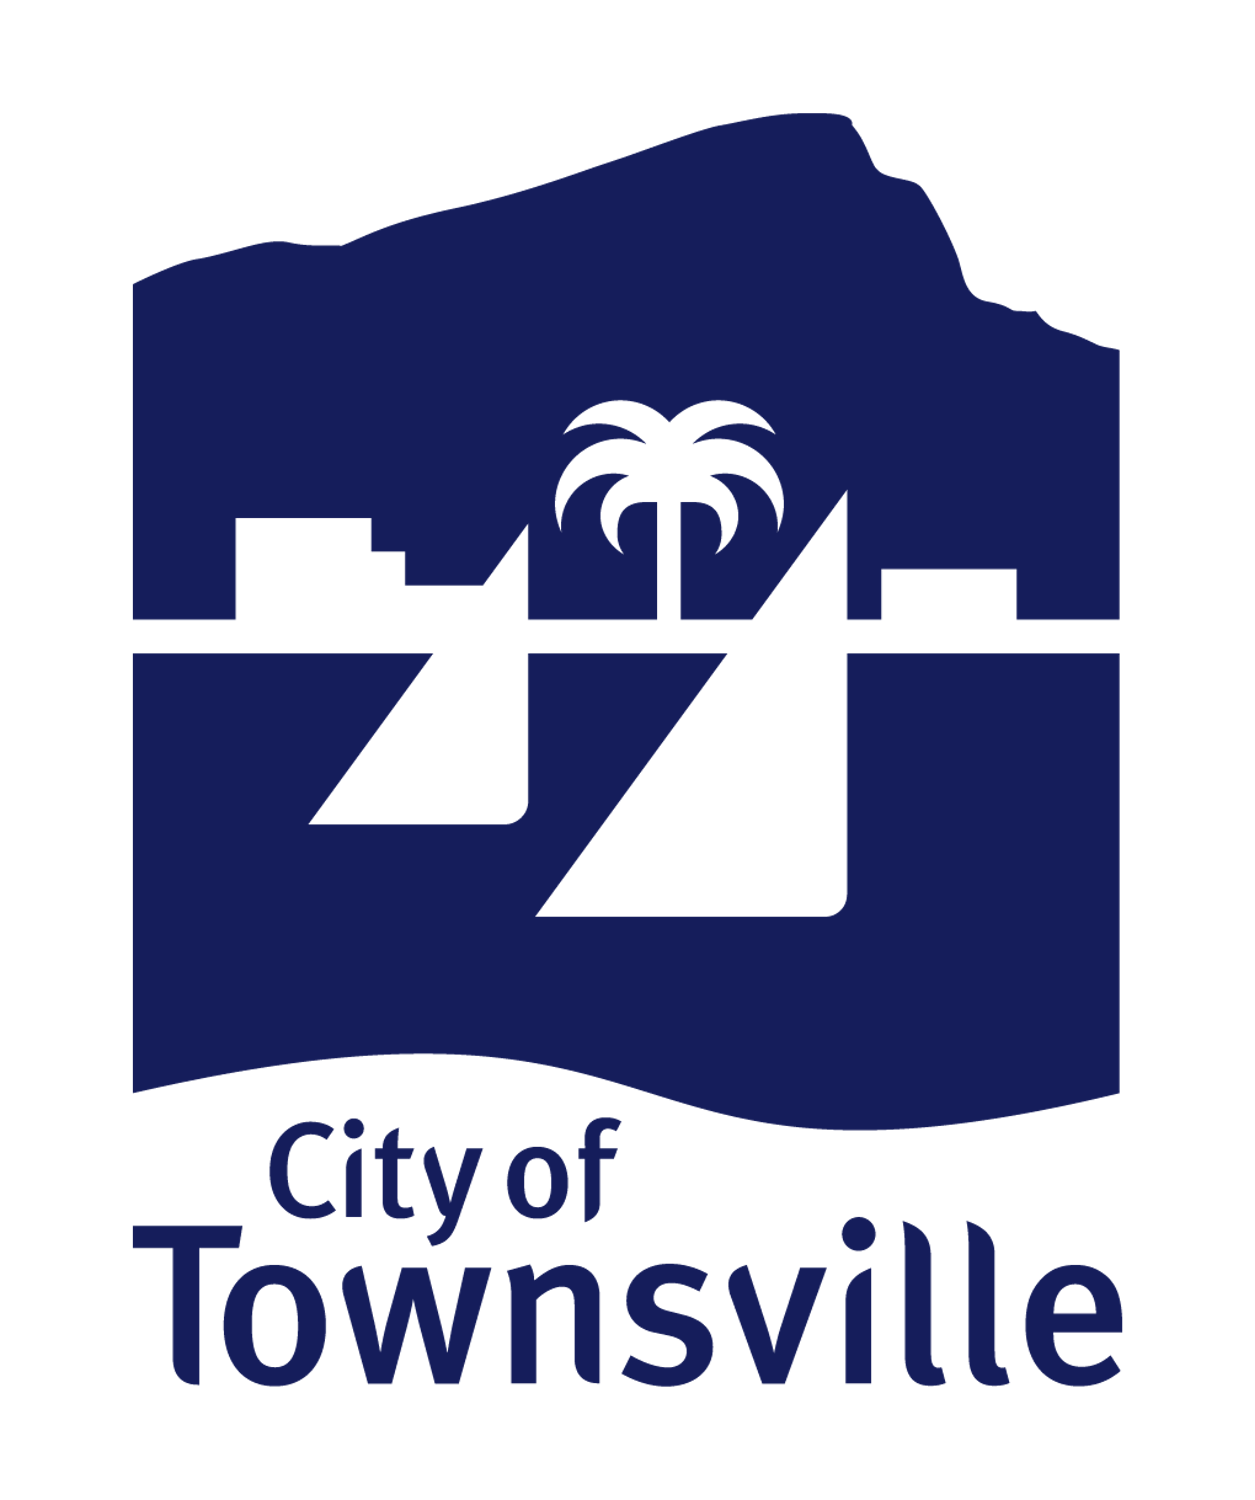 Have Your Say Townsville